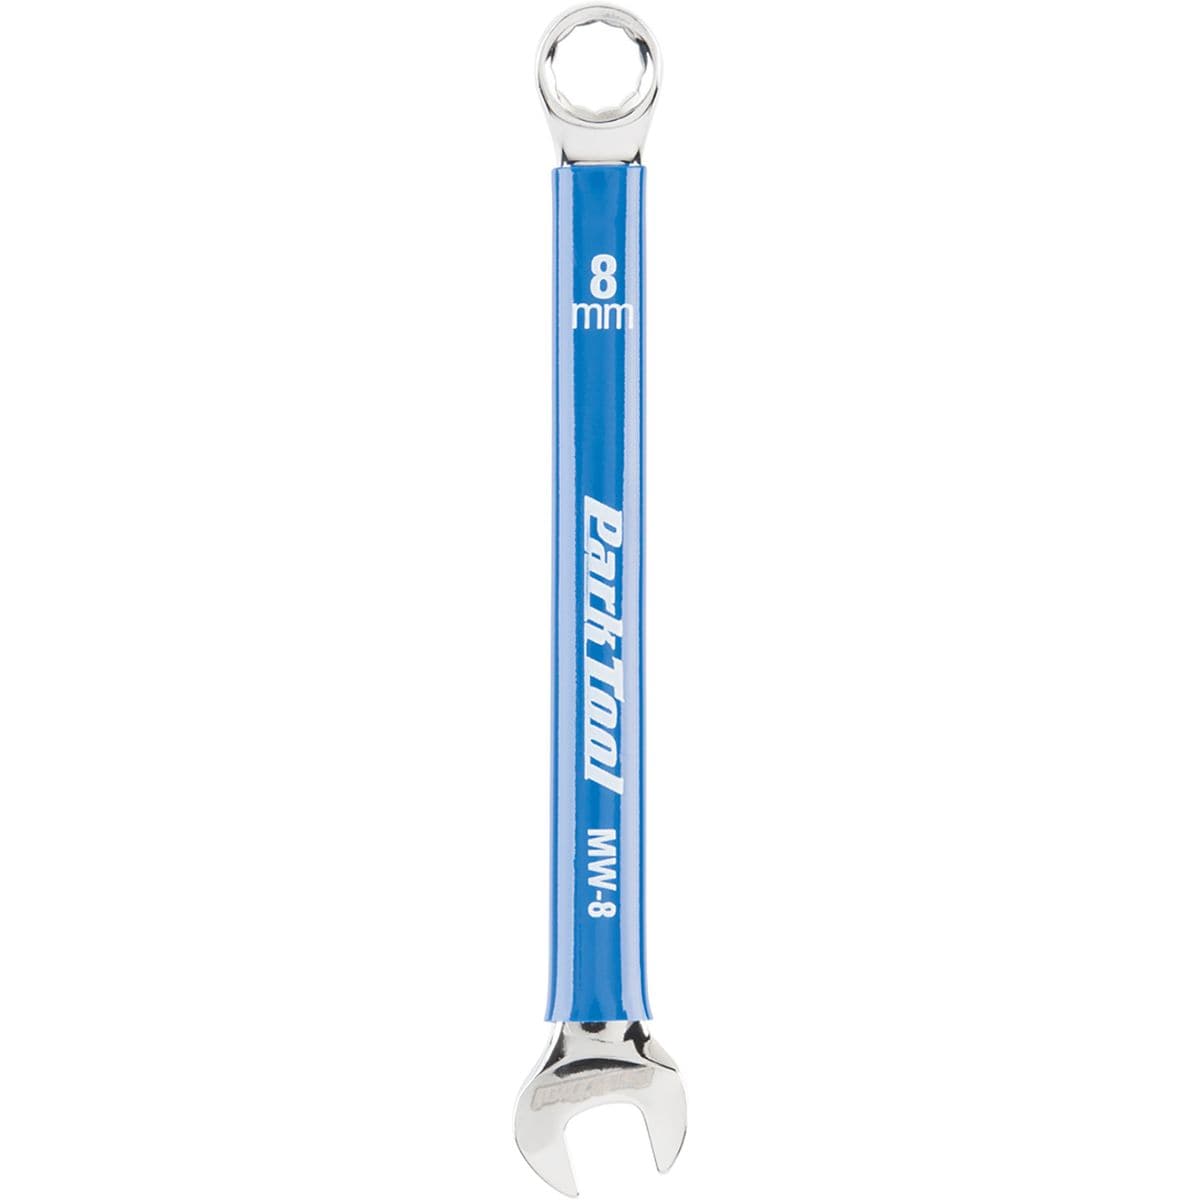 Park Tool Metric Wrench One Color, 8mm